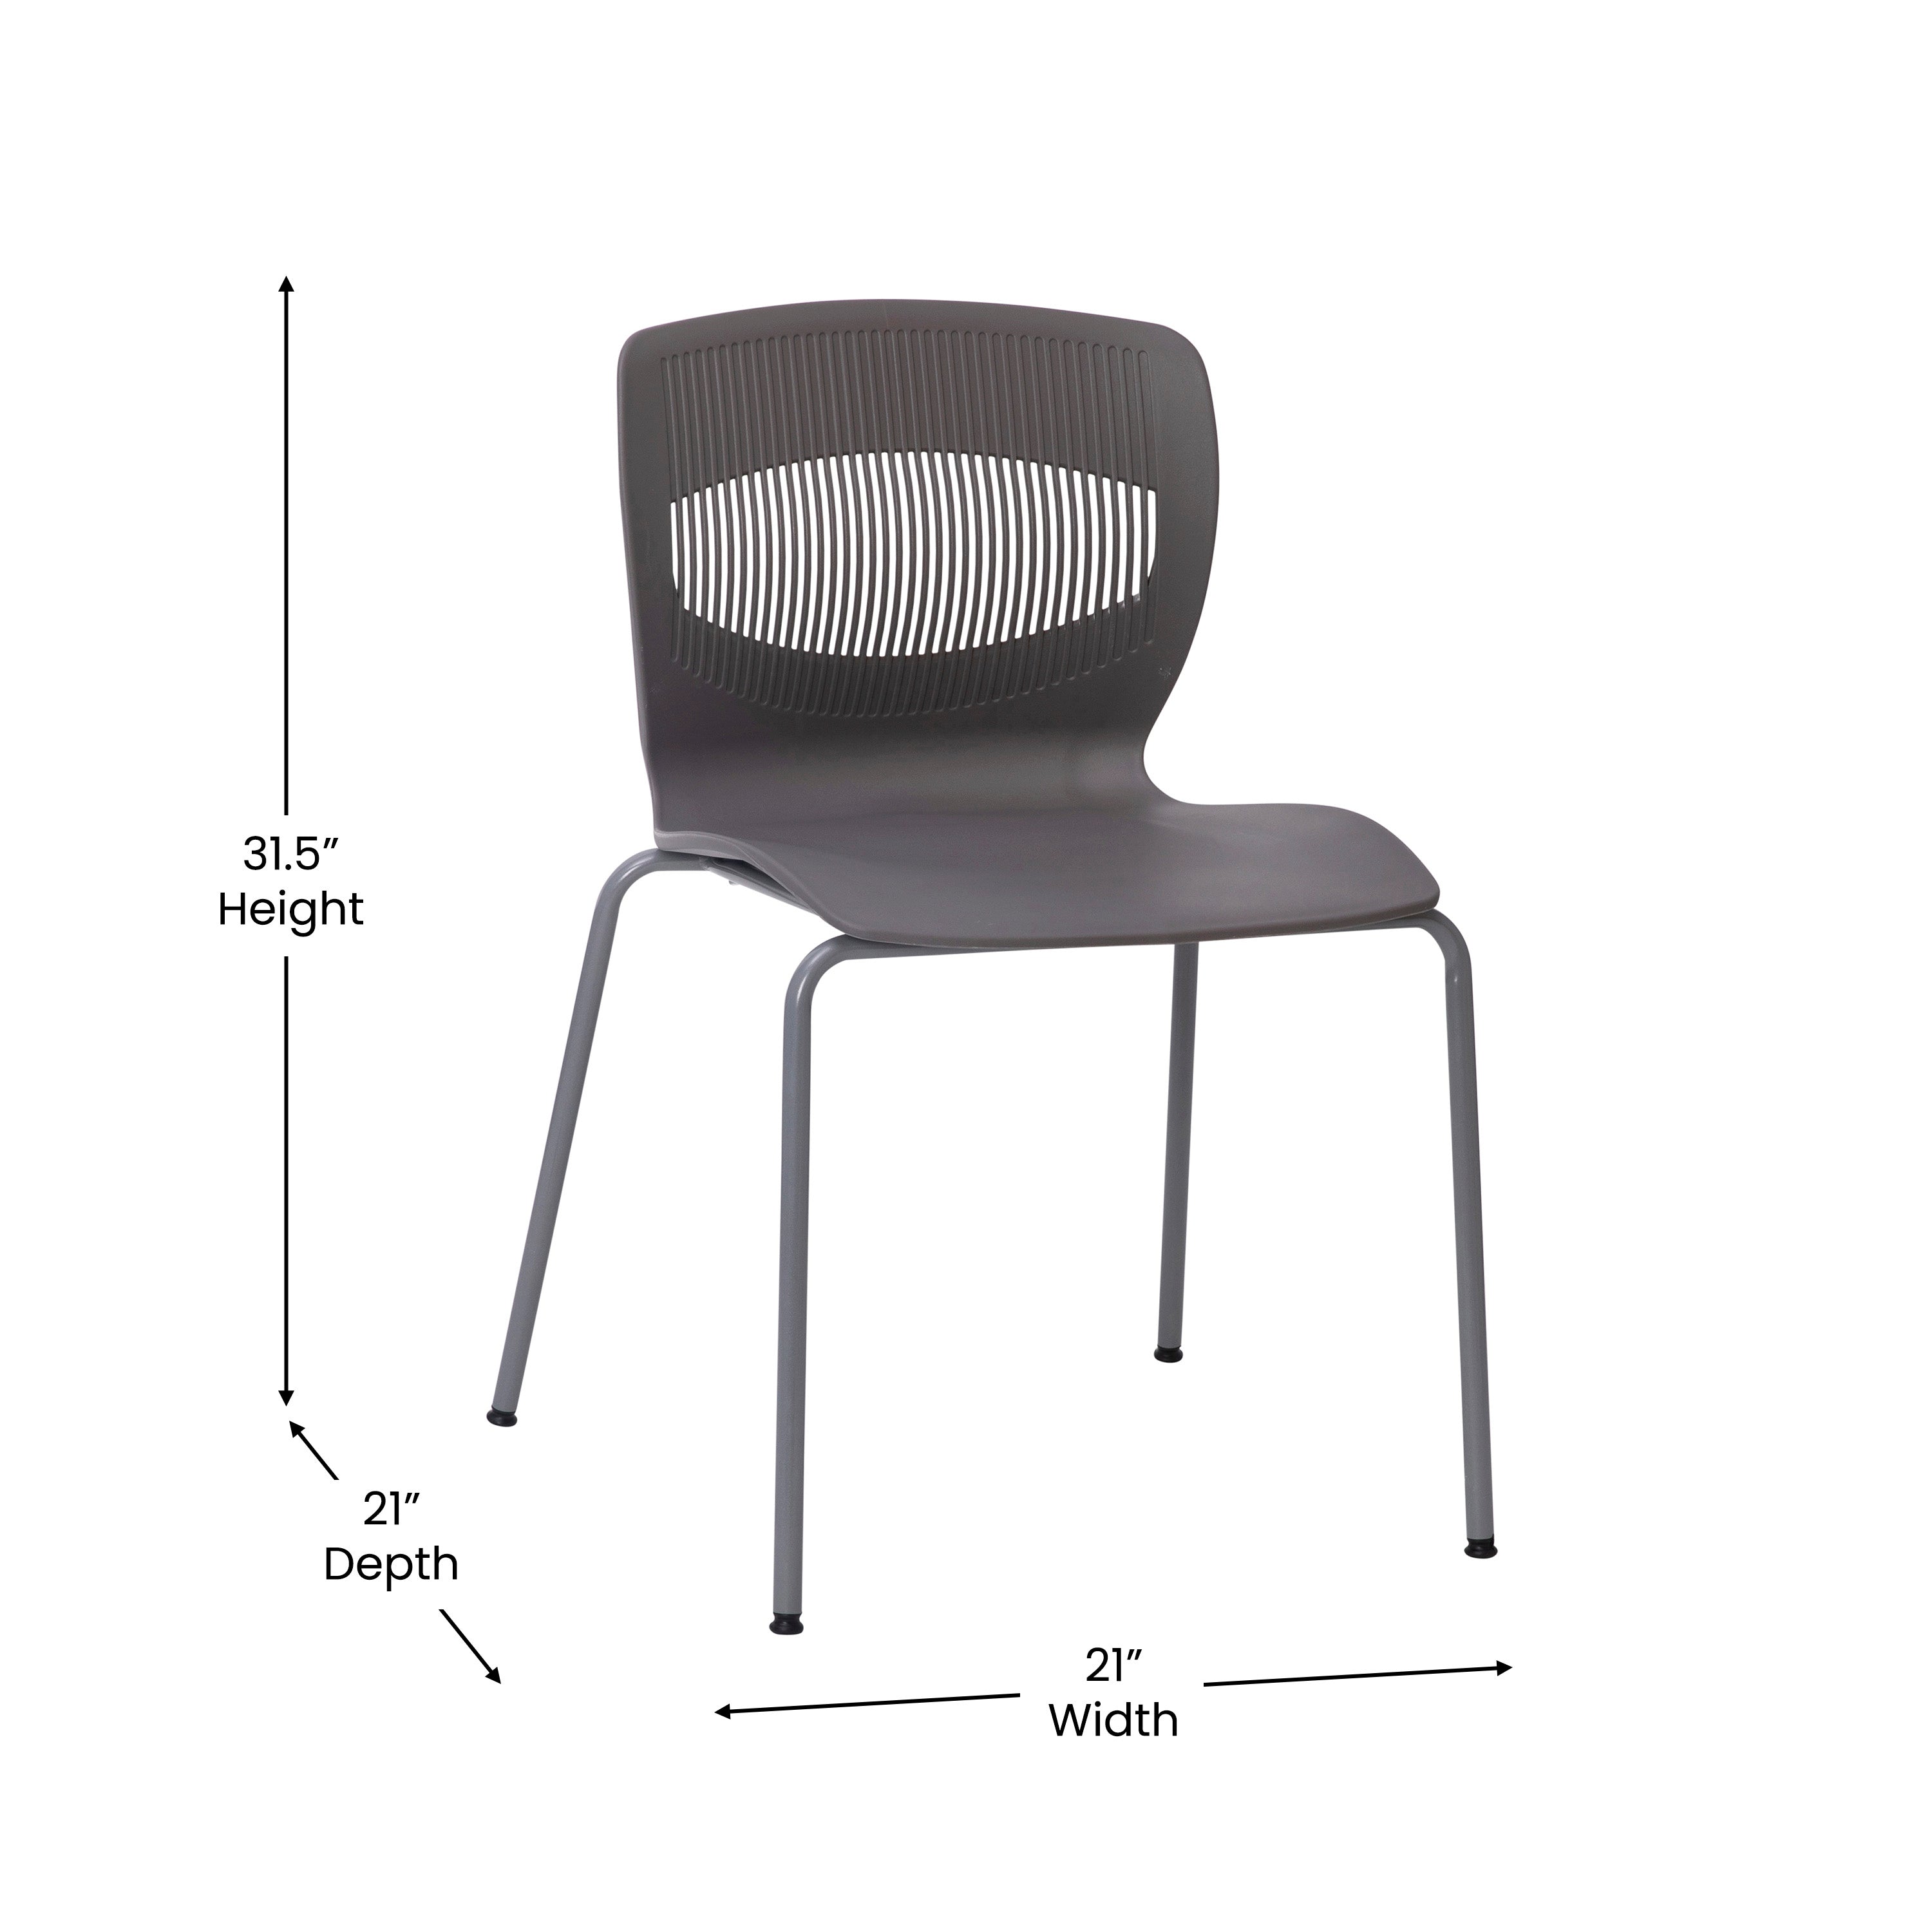 HERCULES Series Commercial Grade 770 lb. Capacity Ergonomic Stack Chair with Lumbar Support and Steel Frame-Plastic Stack Chair-Flash Furniture-Wall2Wall Furnishings